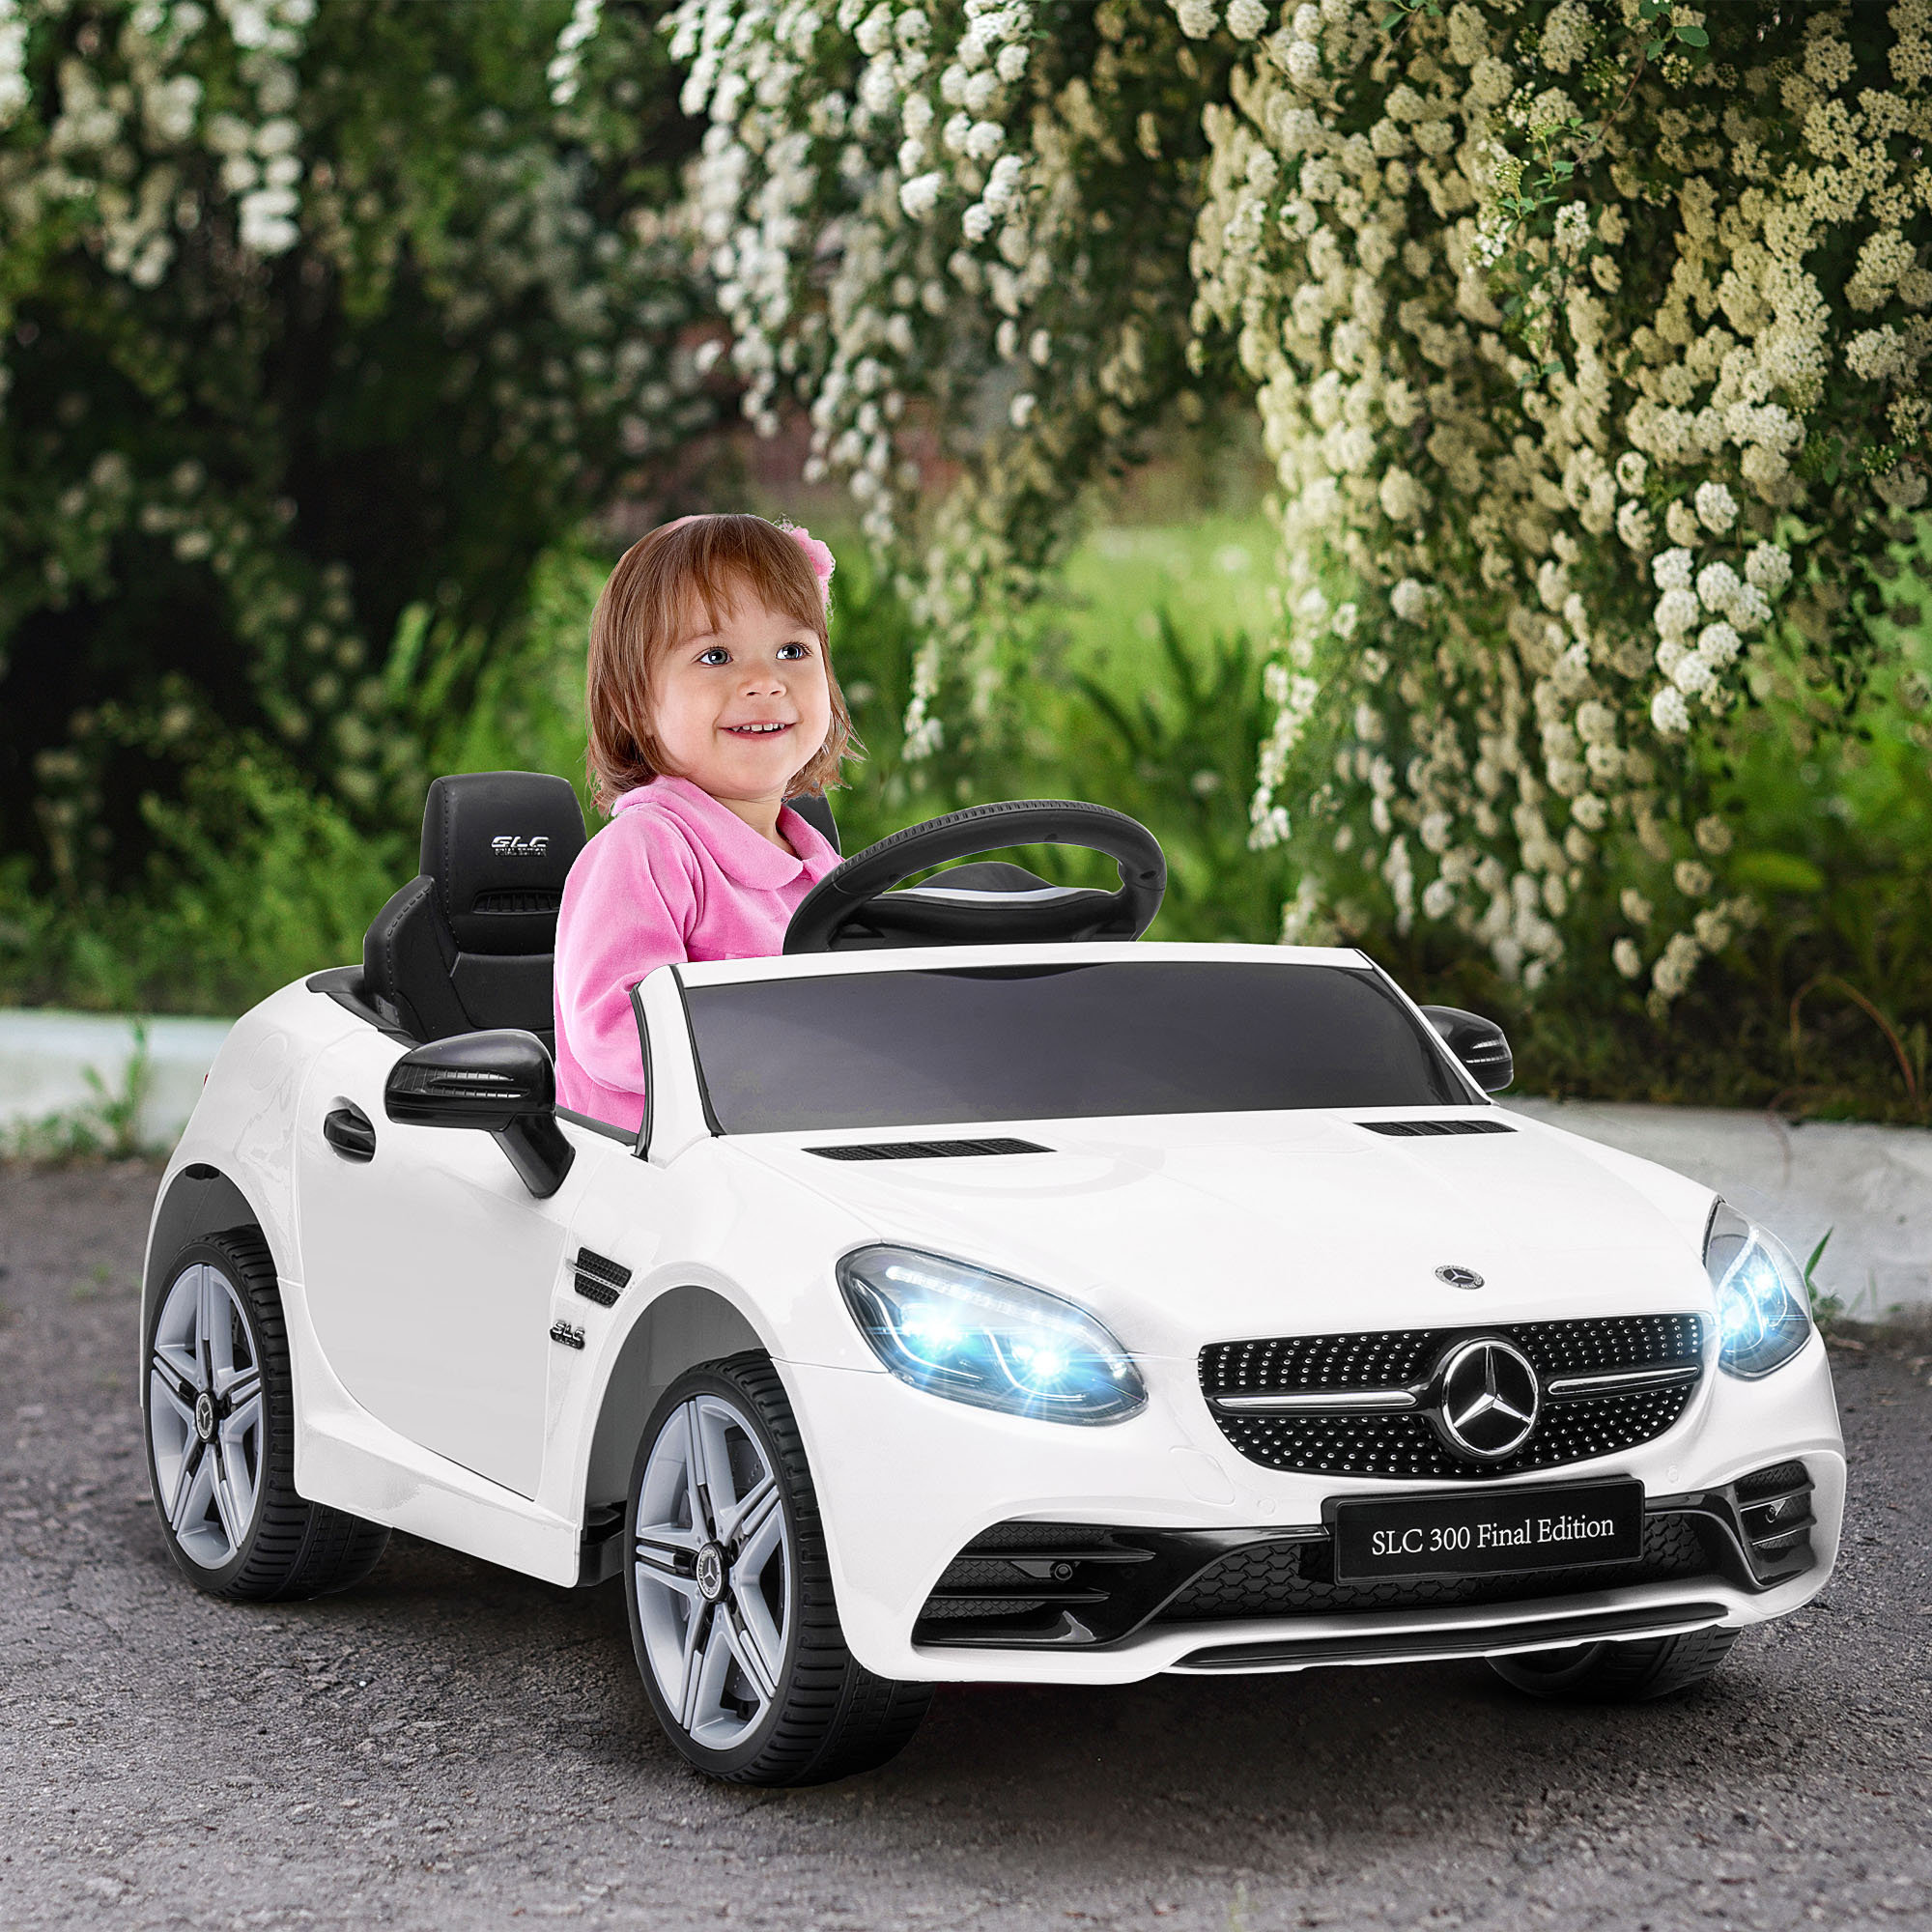 12V Kids Electric Ride On Car with Remote Control, Battery Powered Toy